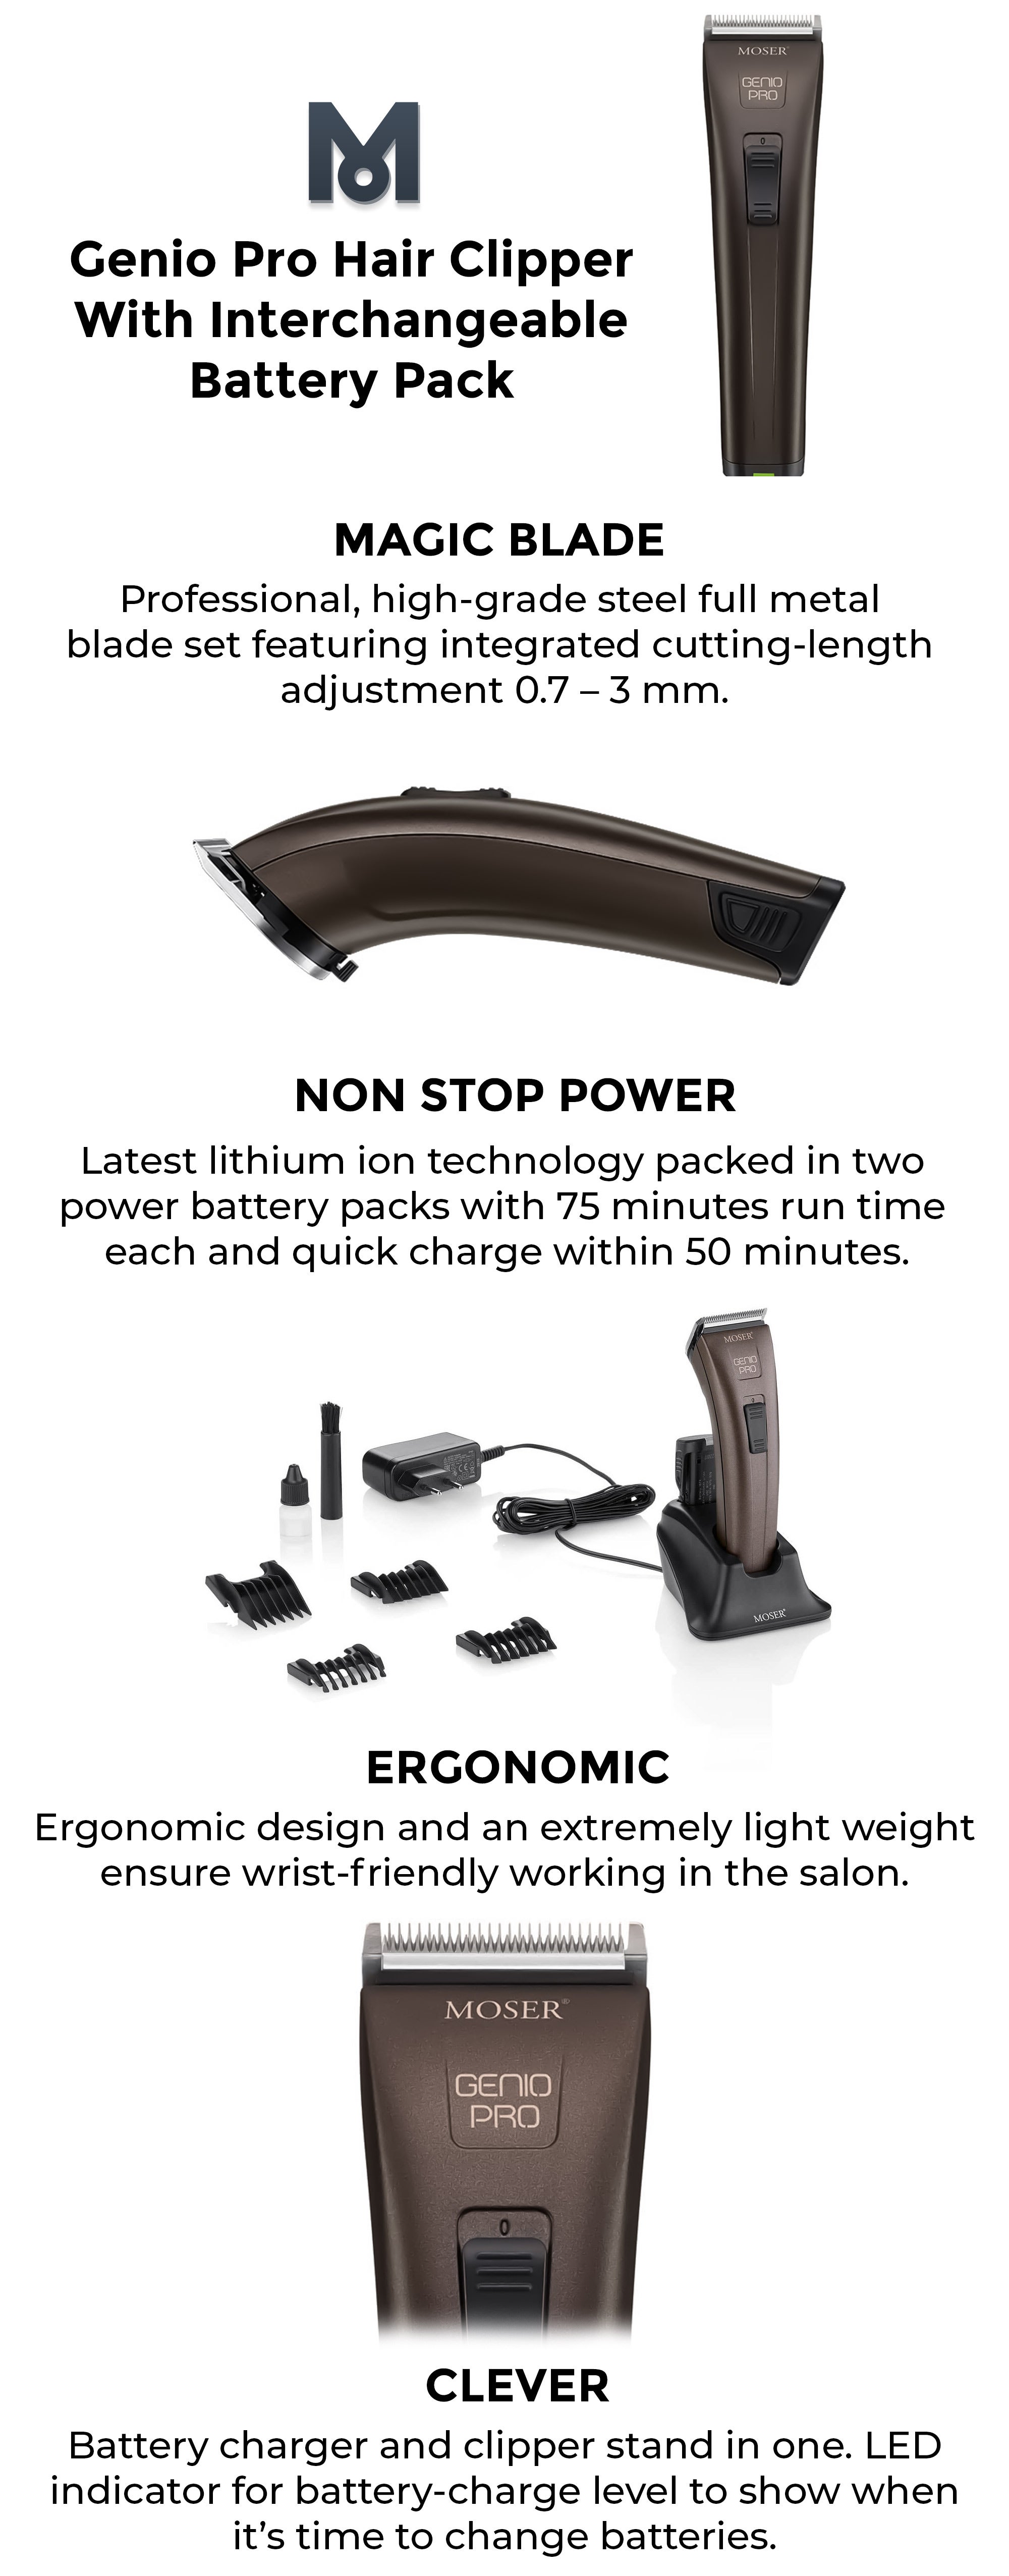 Genio Pro Hair Clipper With Interchangeable Battery Pack Black 280grams